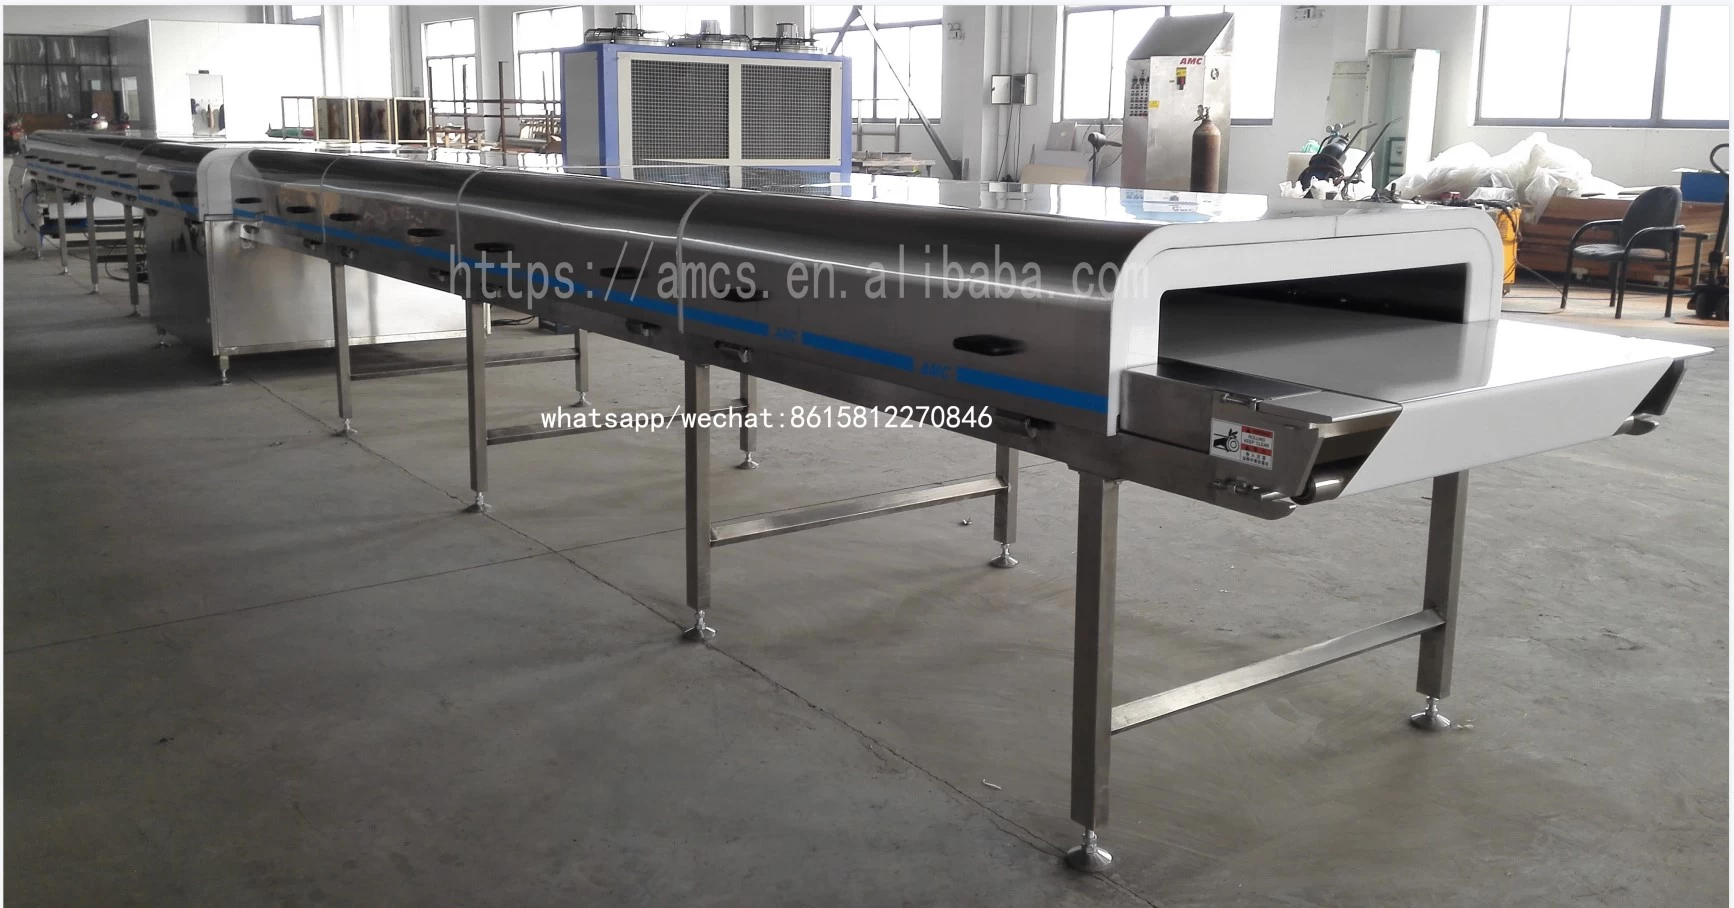 Manufacturers of Cooling and Freezing Equipment 